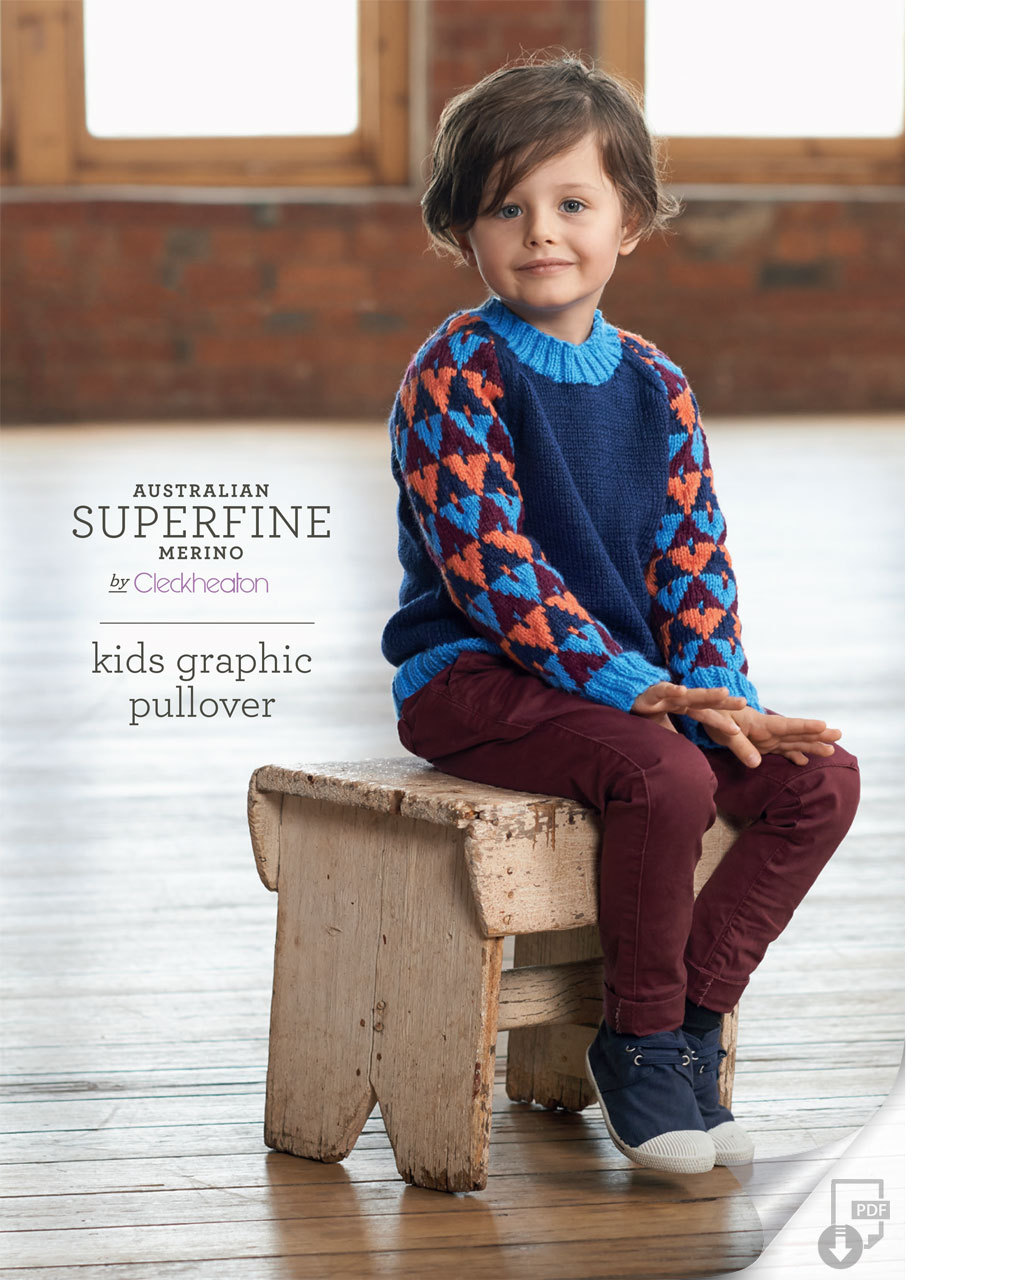 Kids graphic pullover by Cleckheaton1.jpg